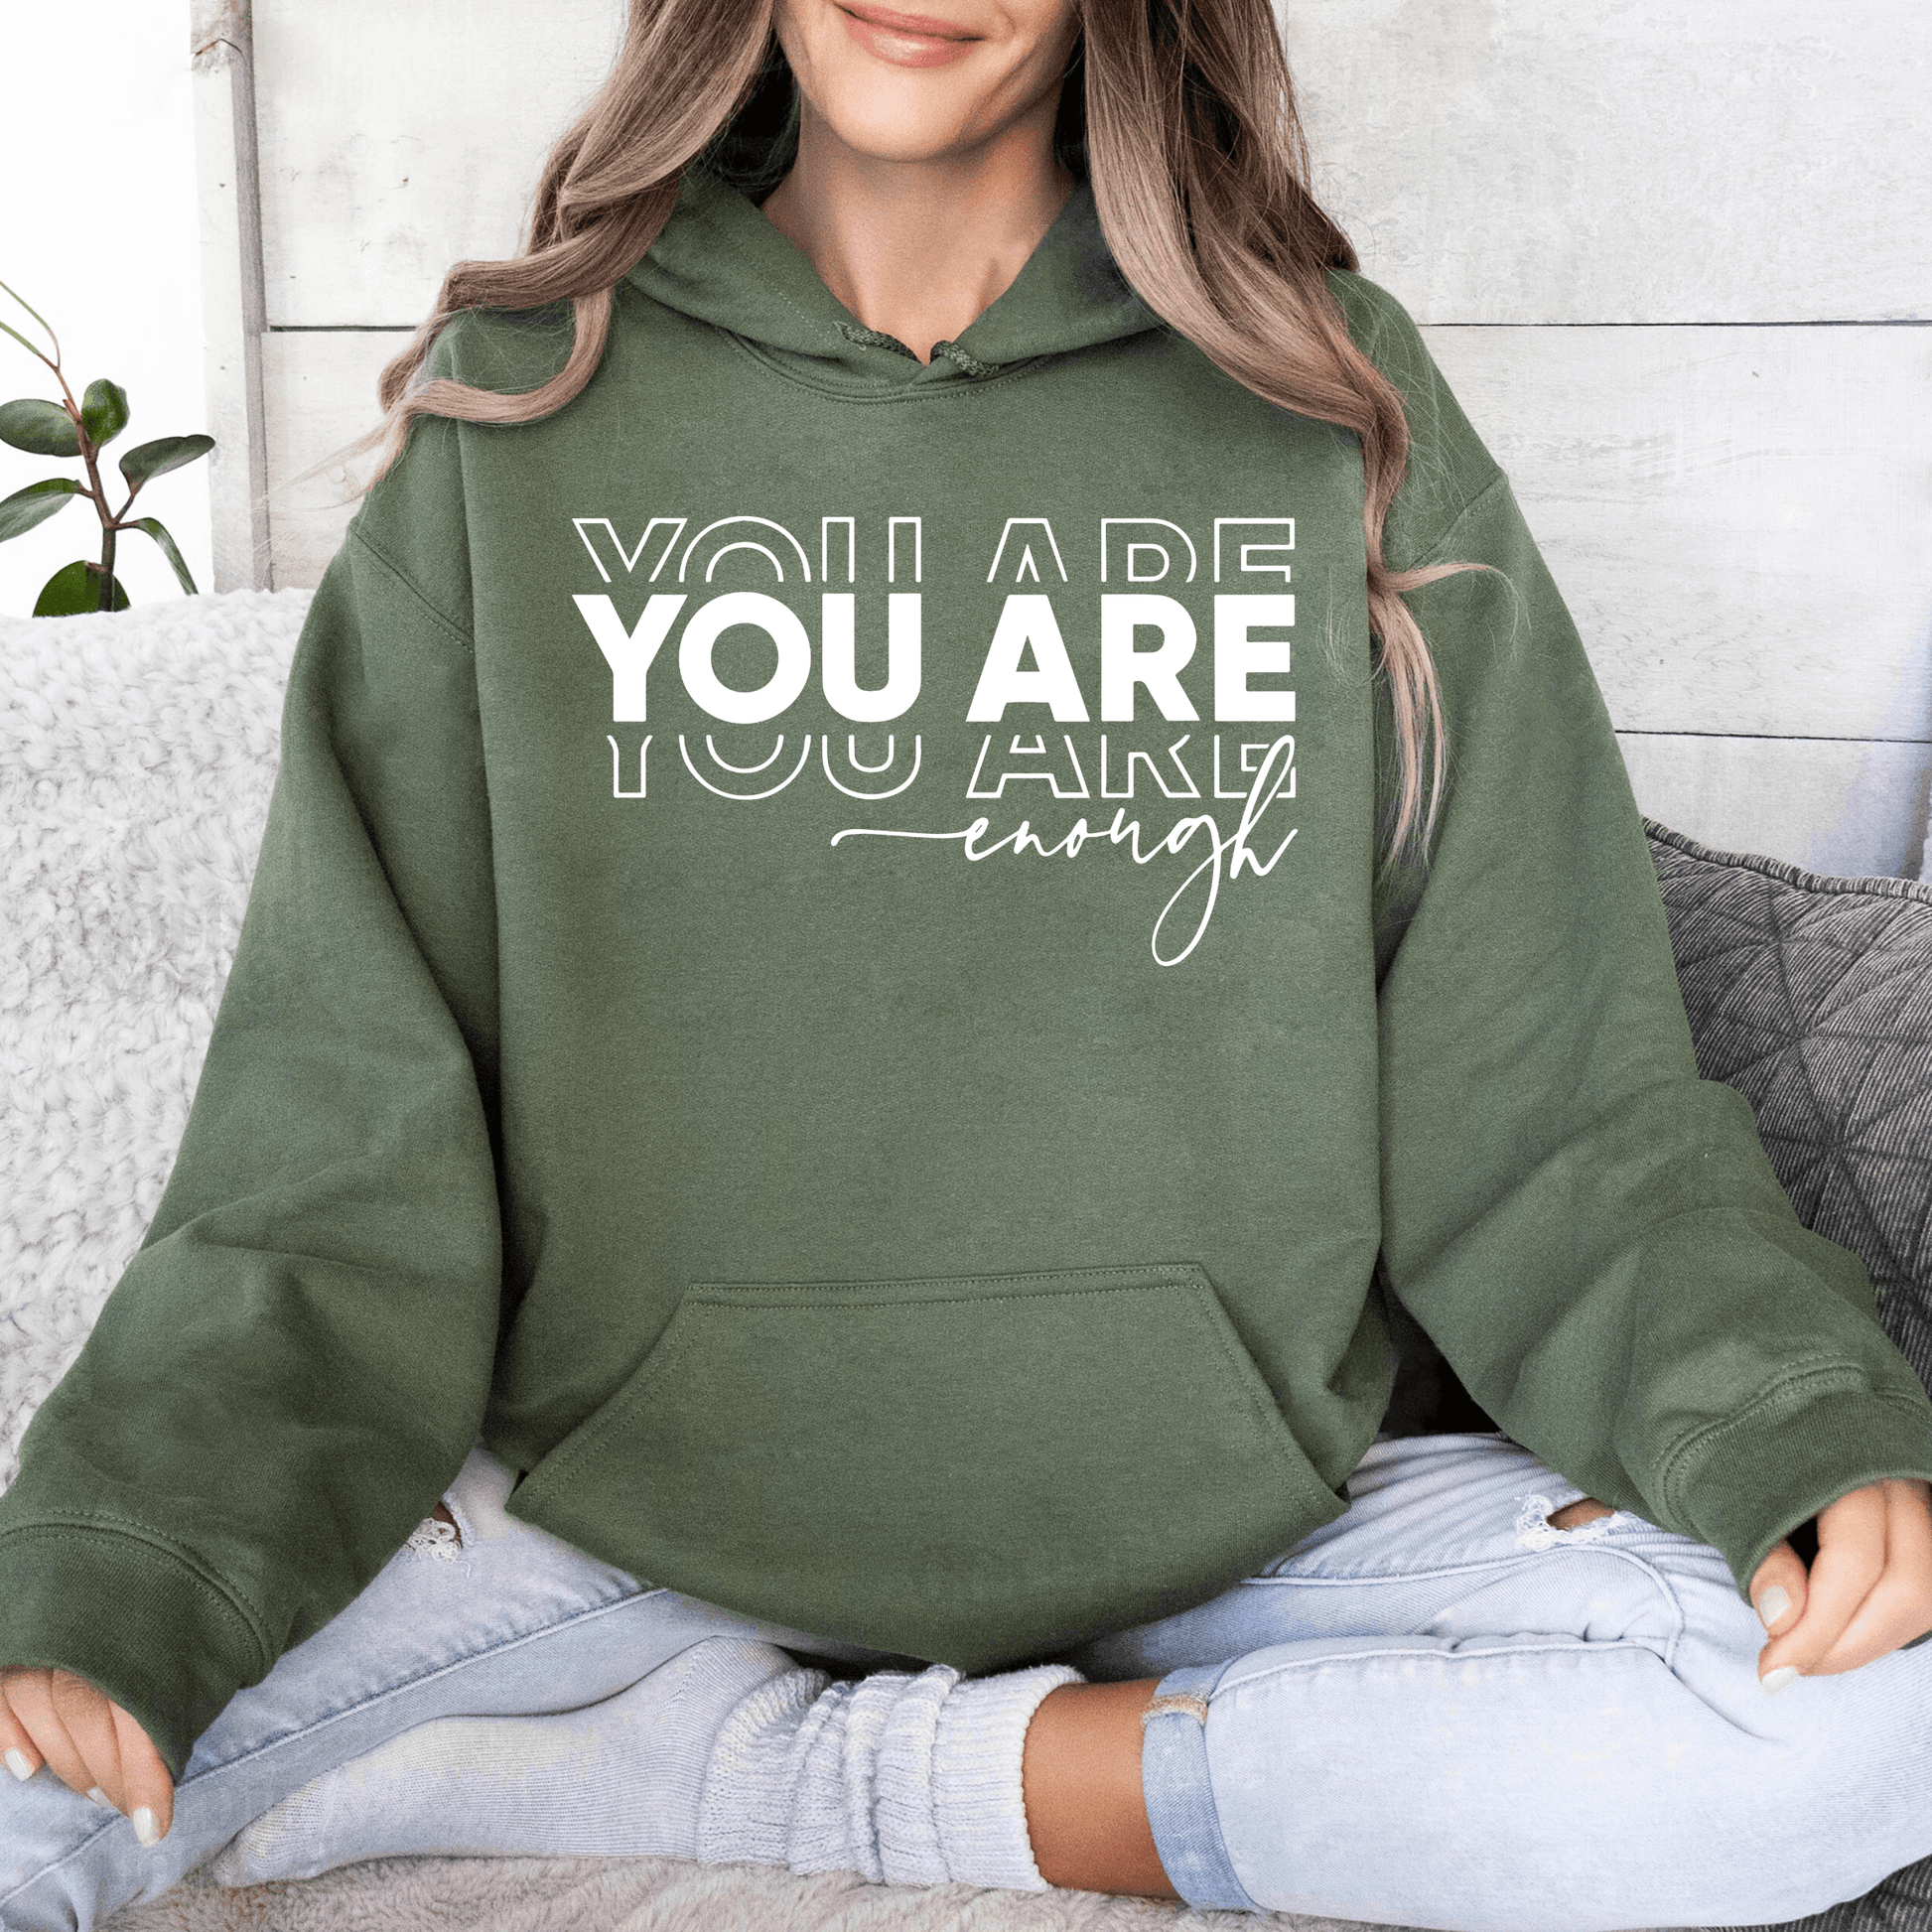 Embrace Your Value - Empowerment and Self-Love, Perfect Reminder Gift - GiftHaus